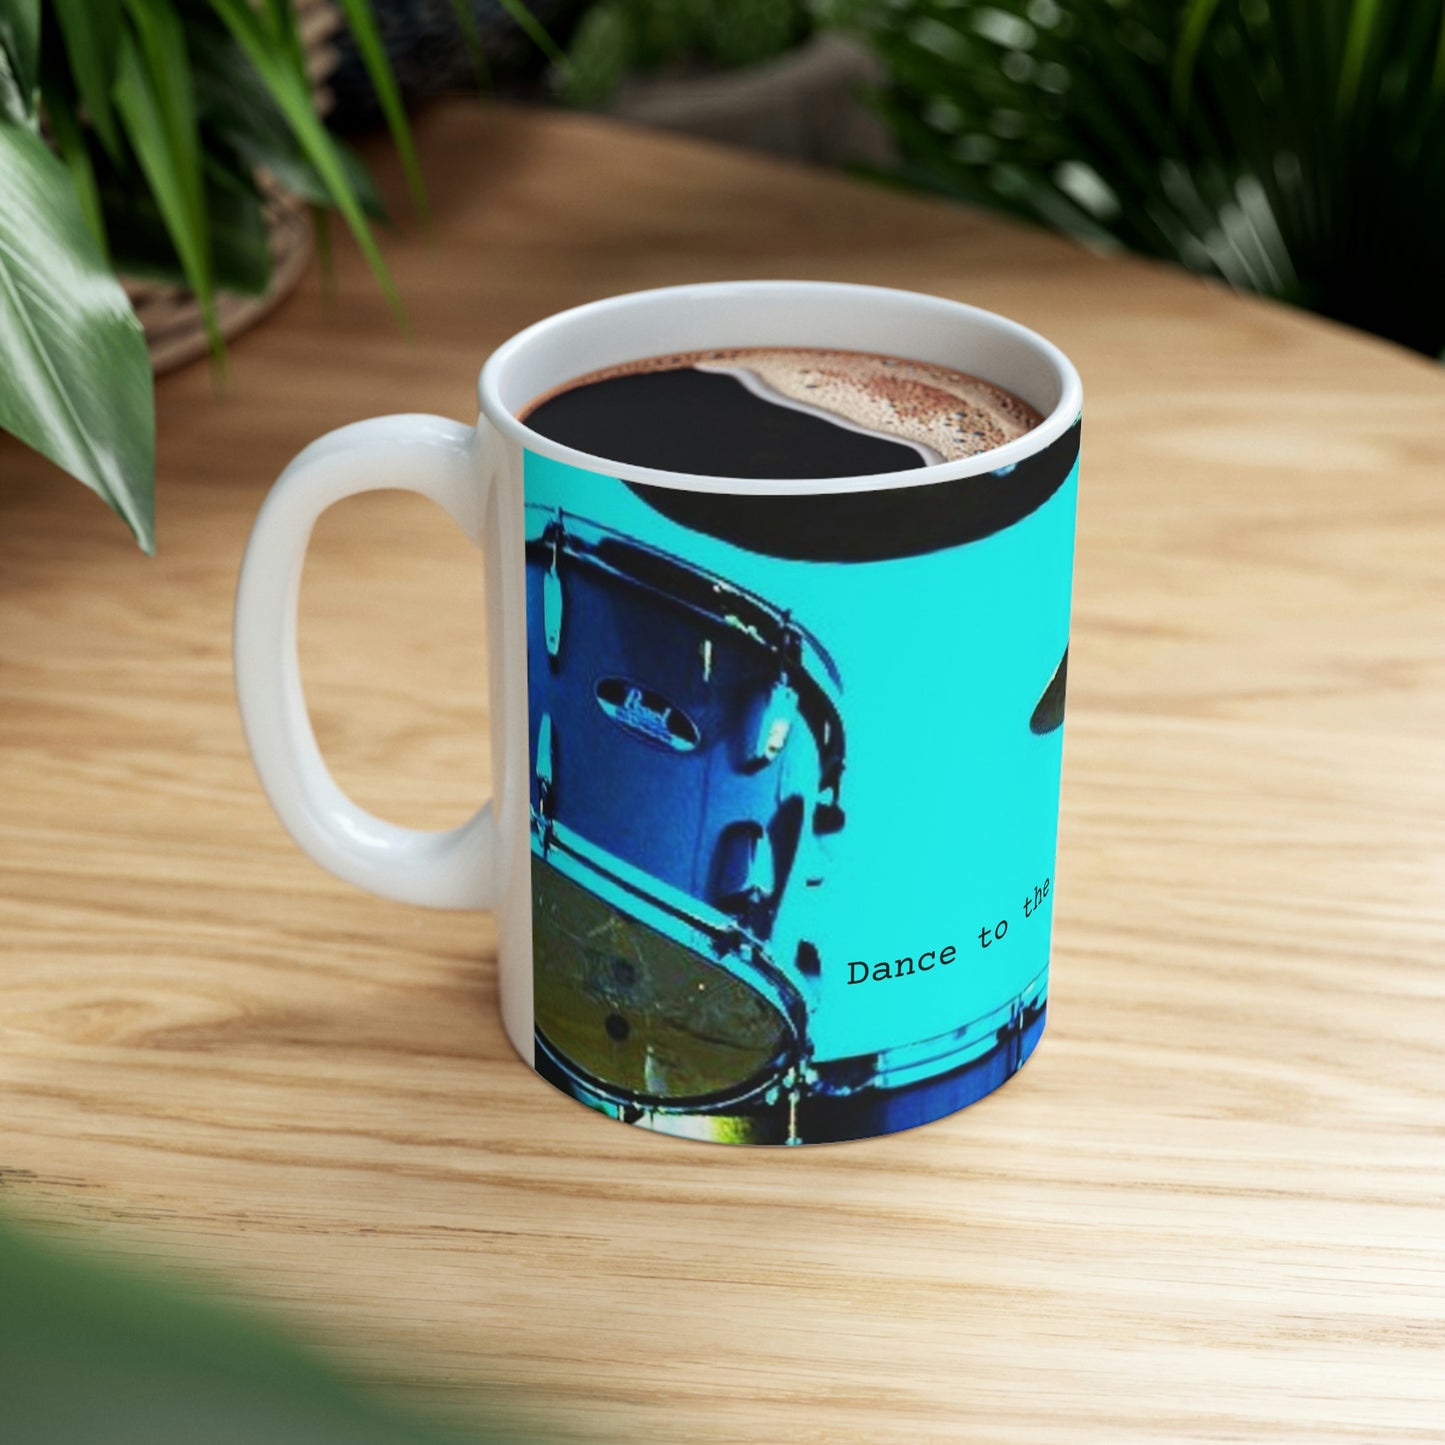 Dance to the beat of a different drummer - Ceramic Mug 11oz - Limited Edition